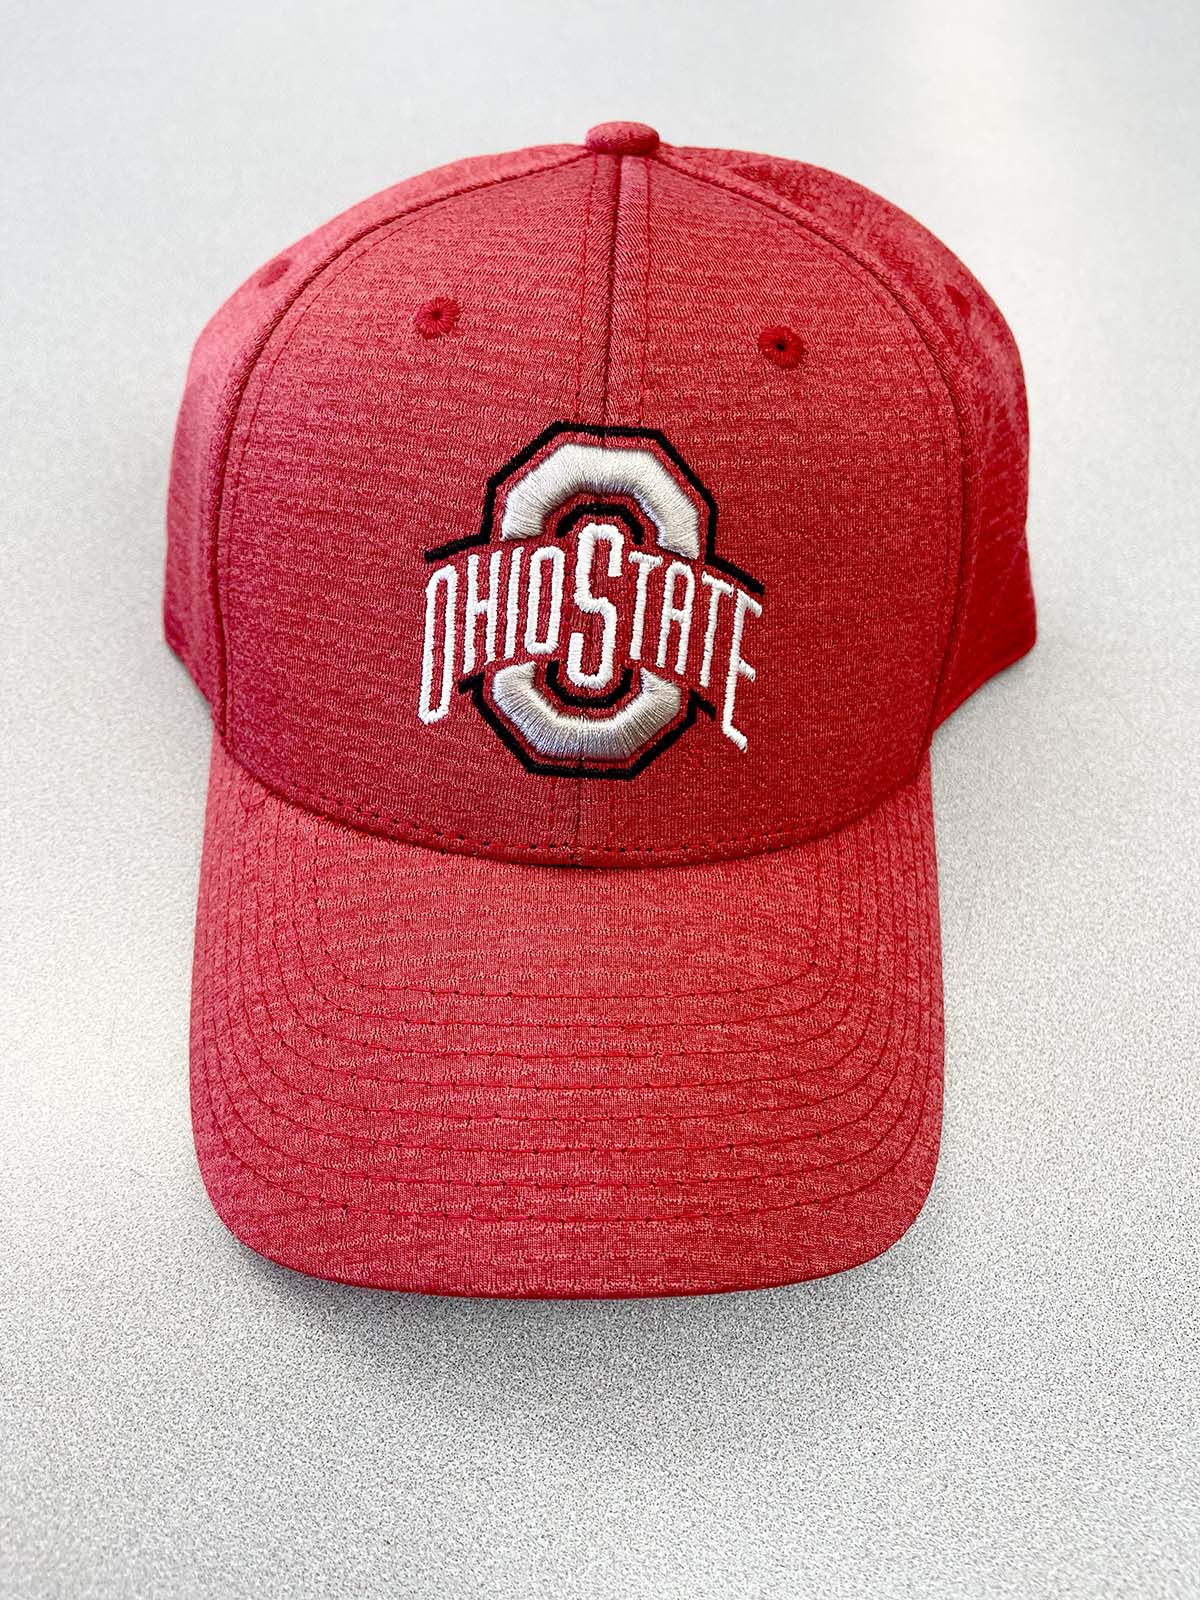 ohio state logo on red hat